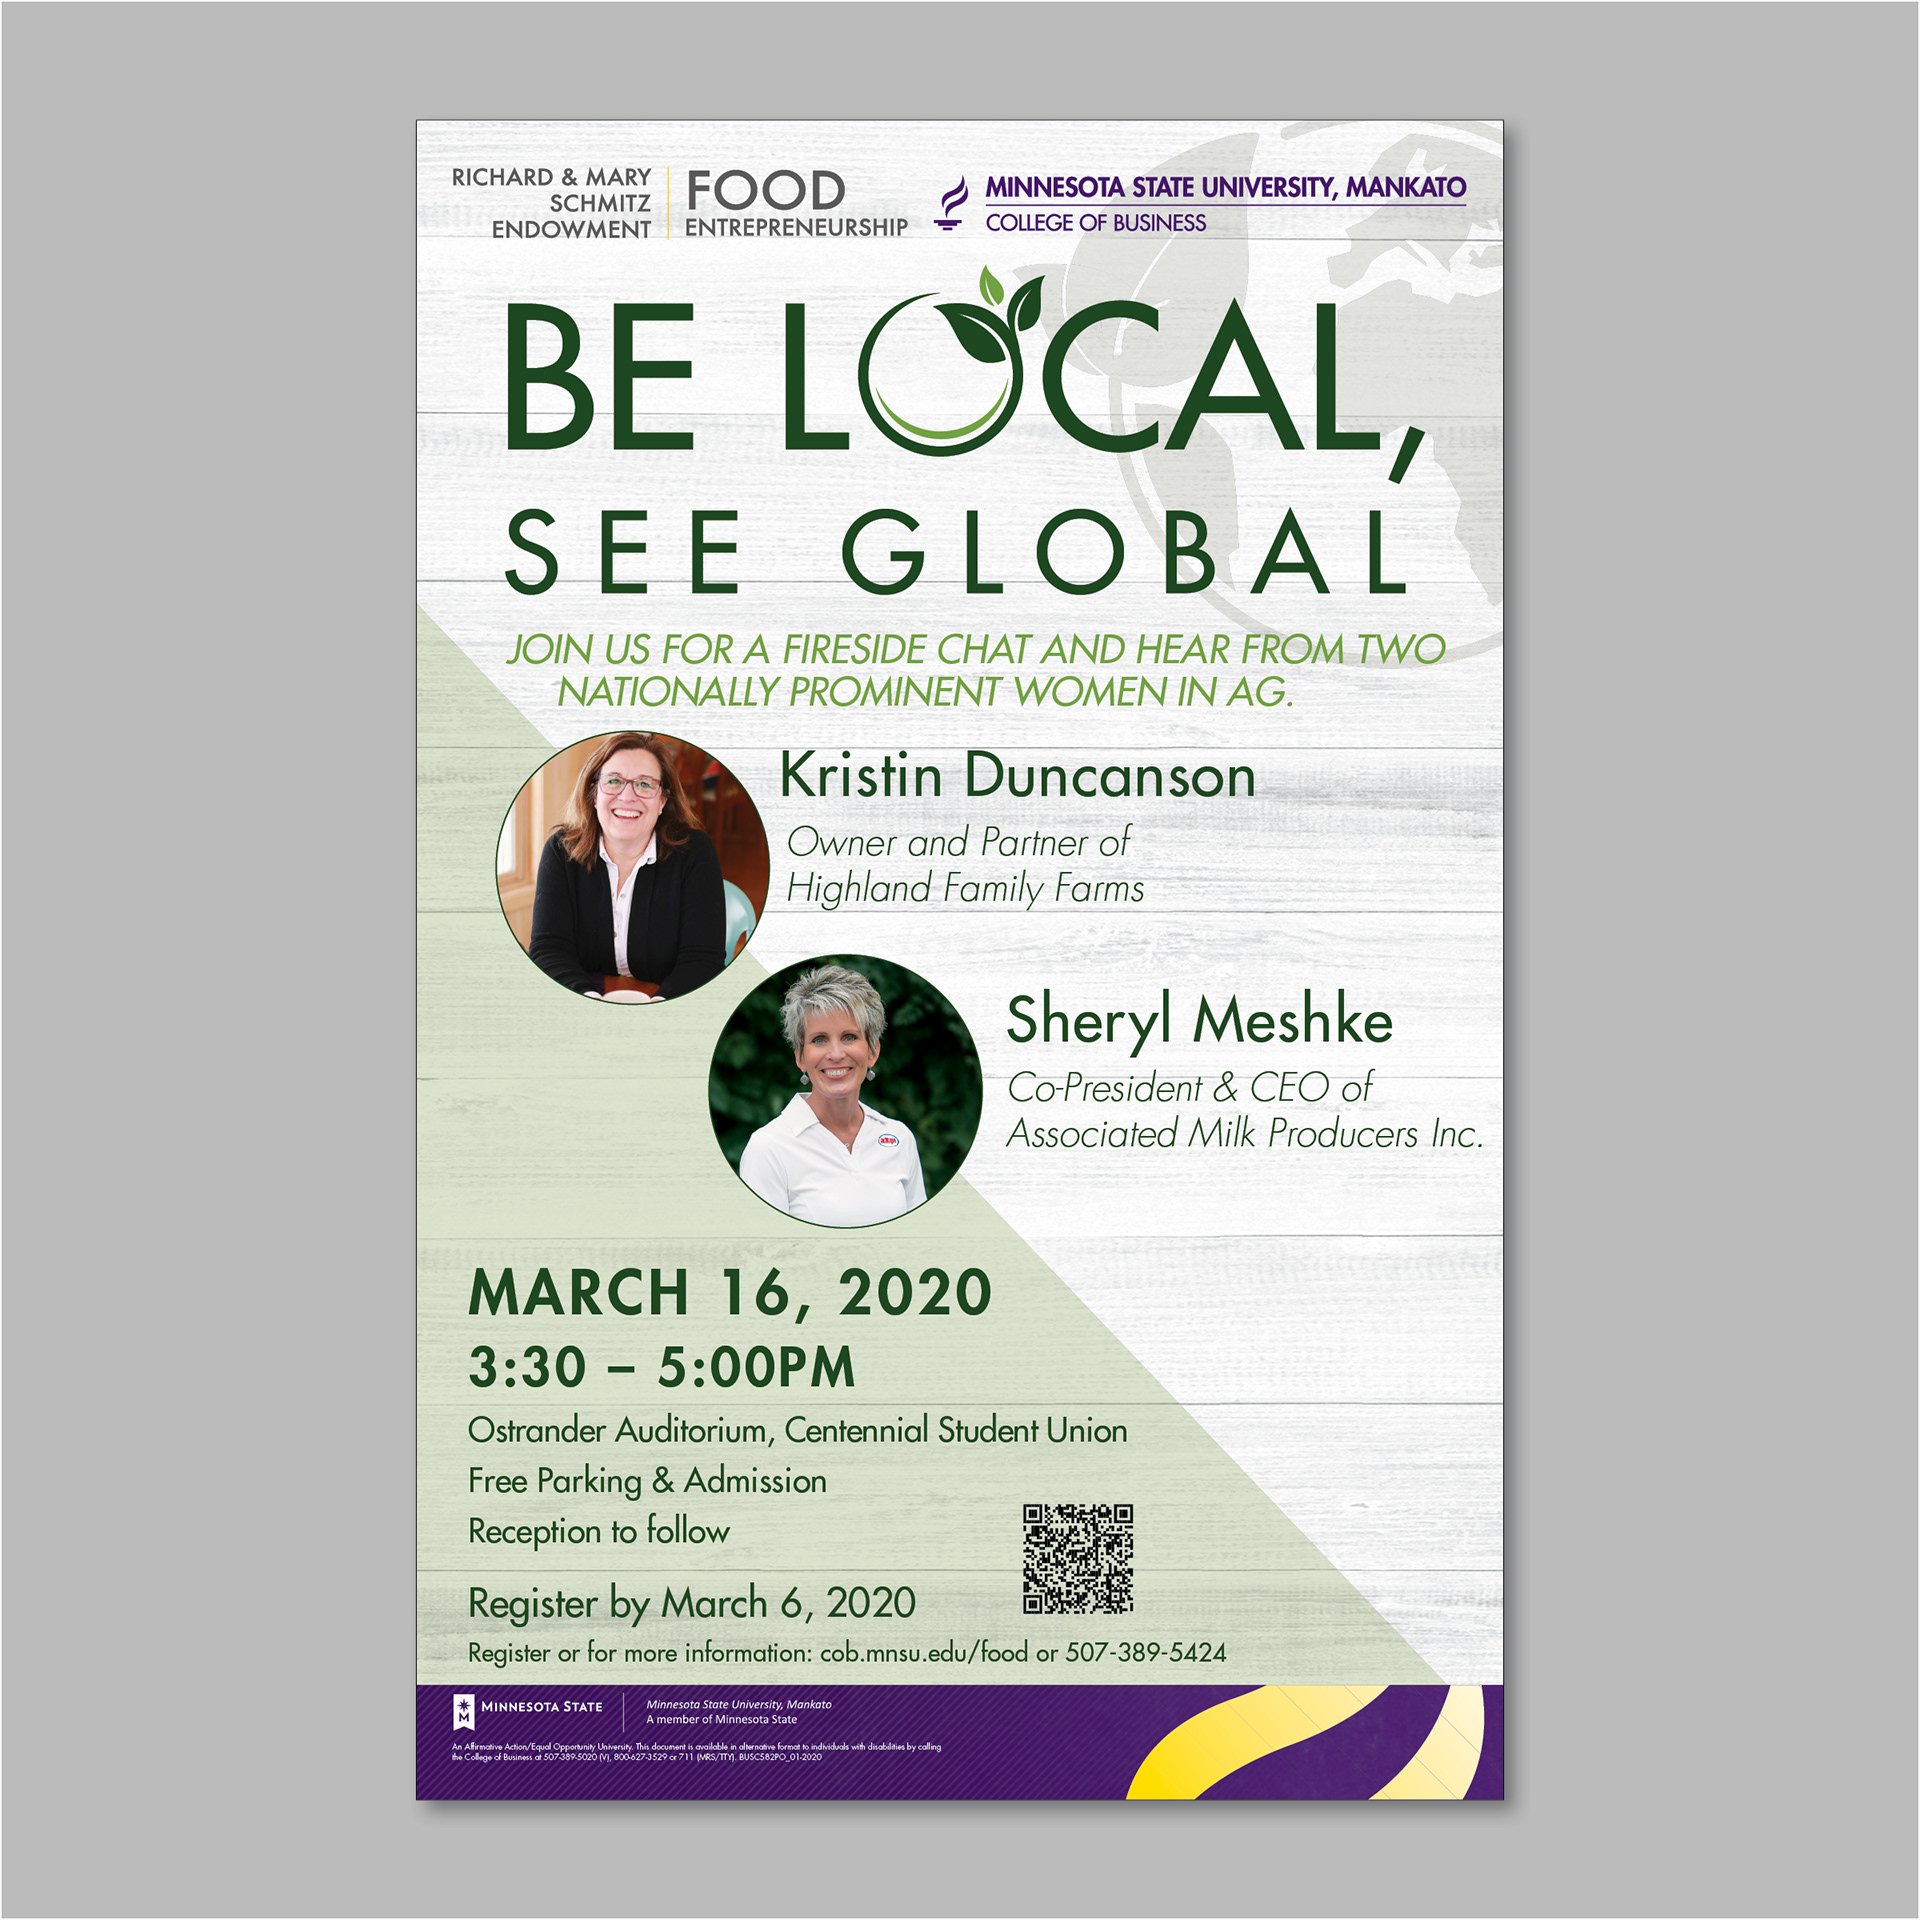 Be local, see global, an agricultural event poster